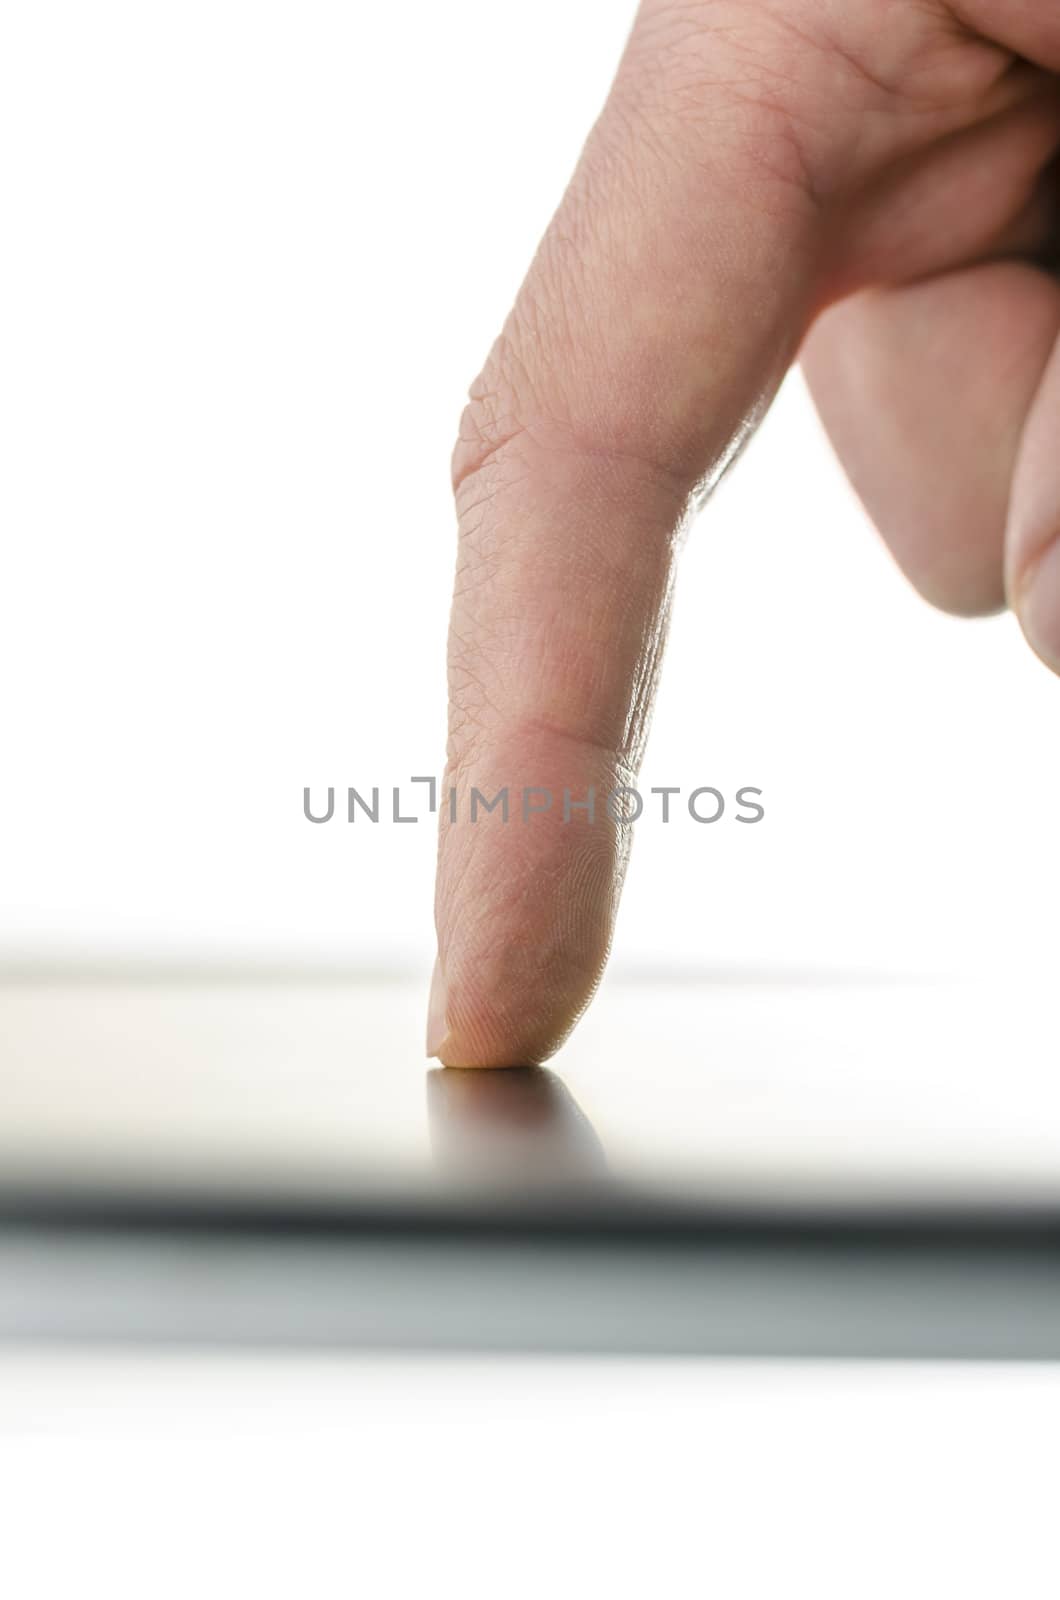 Close up of male finger composing a message on a smart phone device. Over white background.